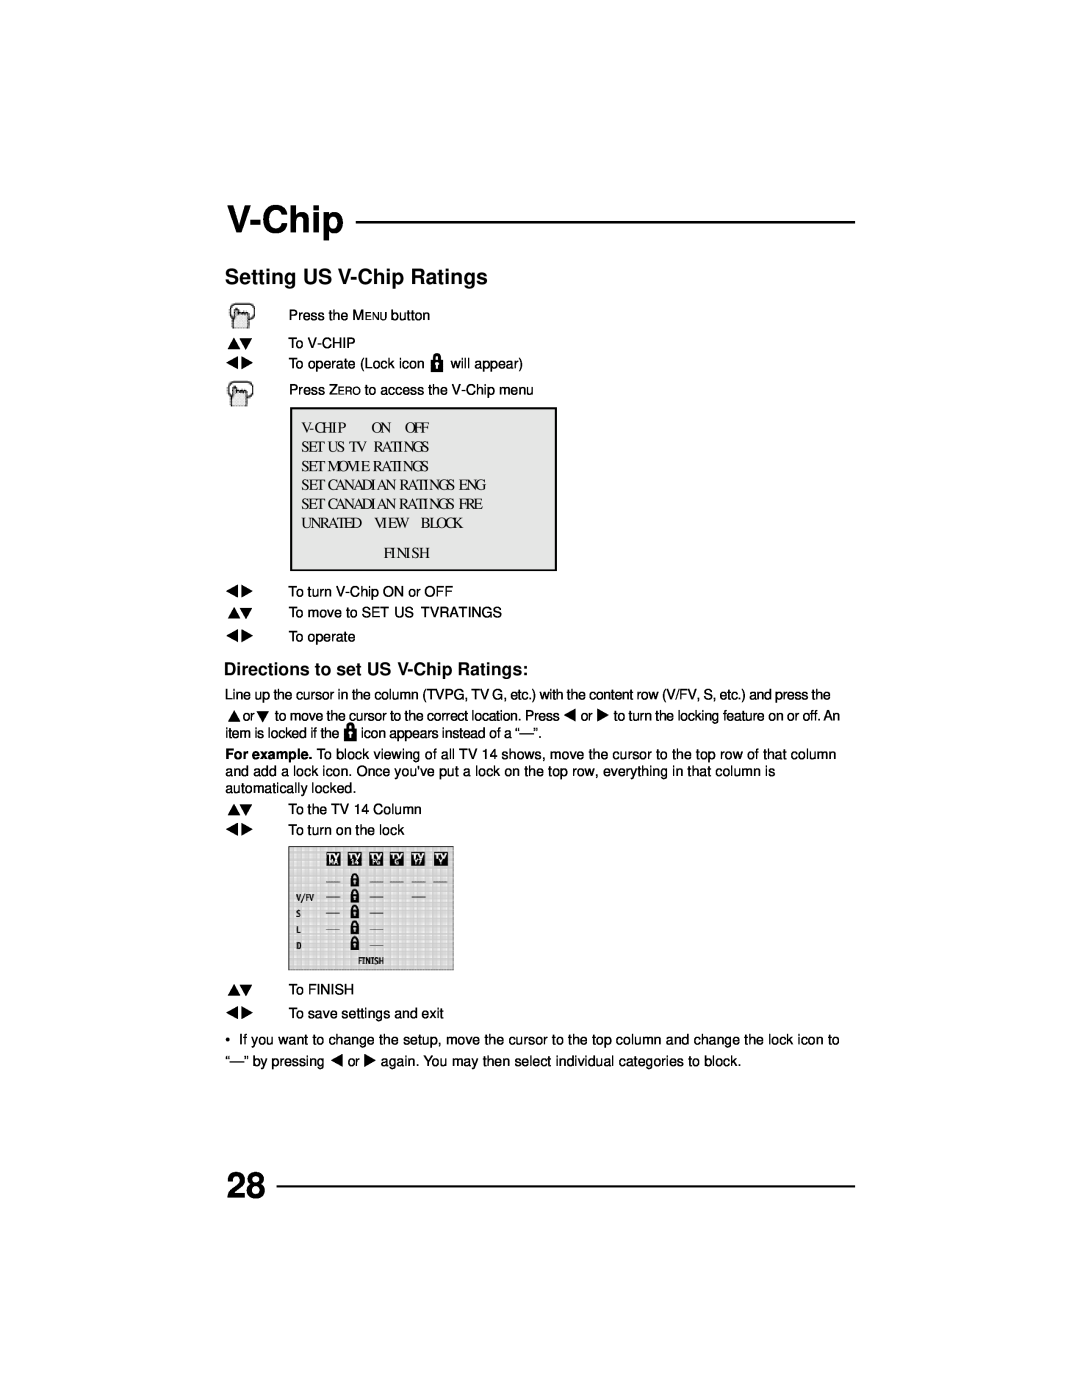 JVC AV 36D202, AV 36D502, AV 36D302, AV 32D302 manual Setting US V-Chip Ratings, Directions to set US V-Chip Ratings, Finish 